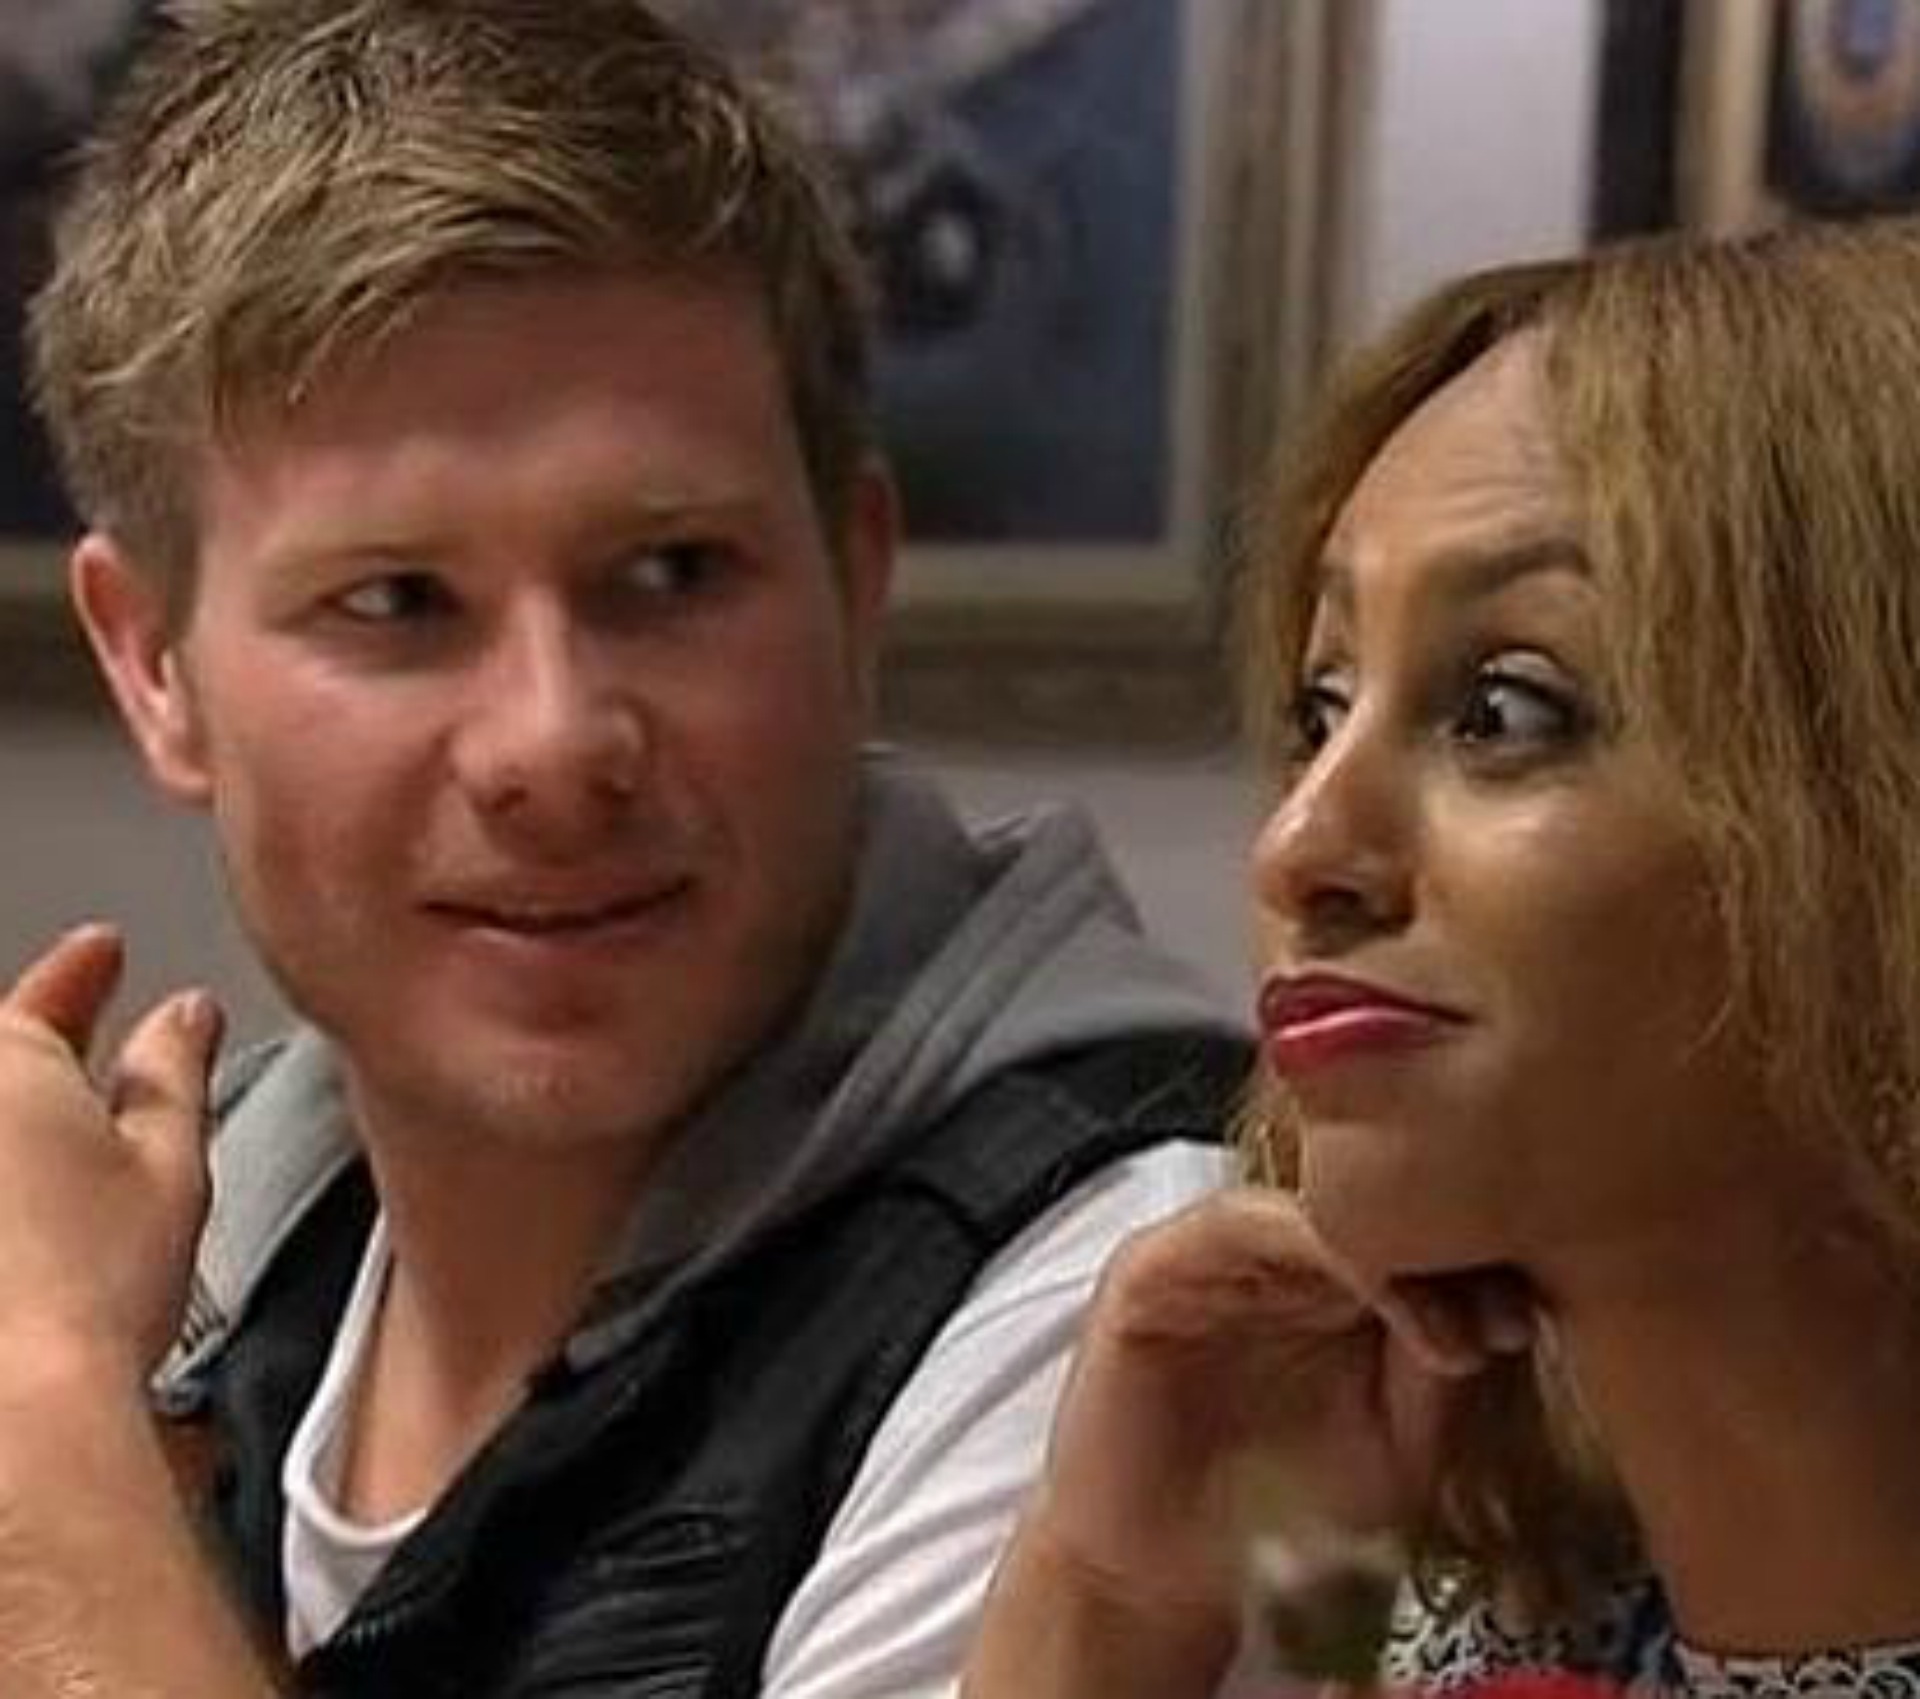 Tempers flare: Married at First Sight